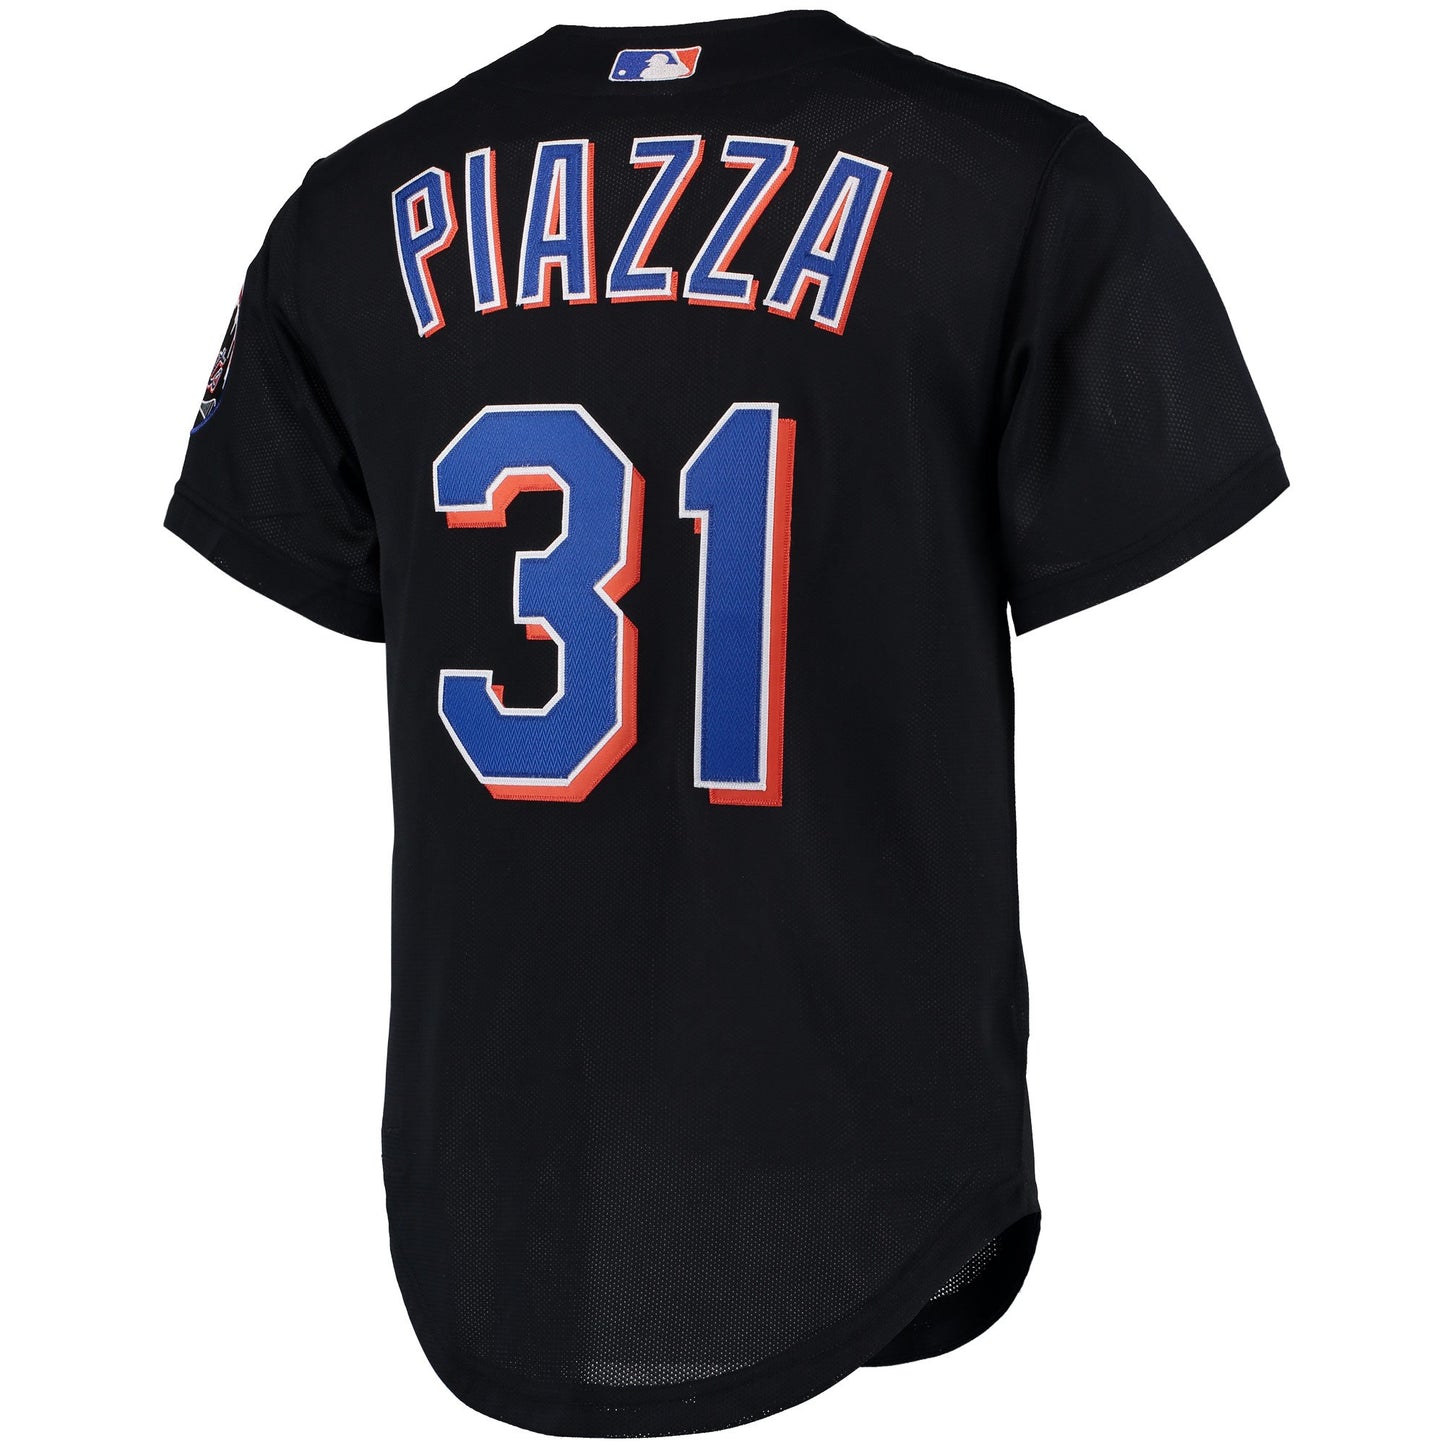 Men's New York Mets Mike Piazza Mitchell & Ness Black Cooperstown Collection Mesh Batting Practice Jersey